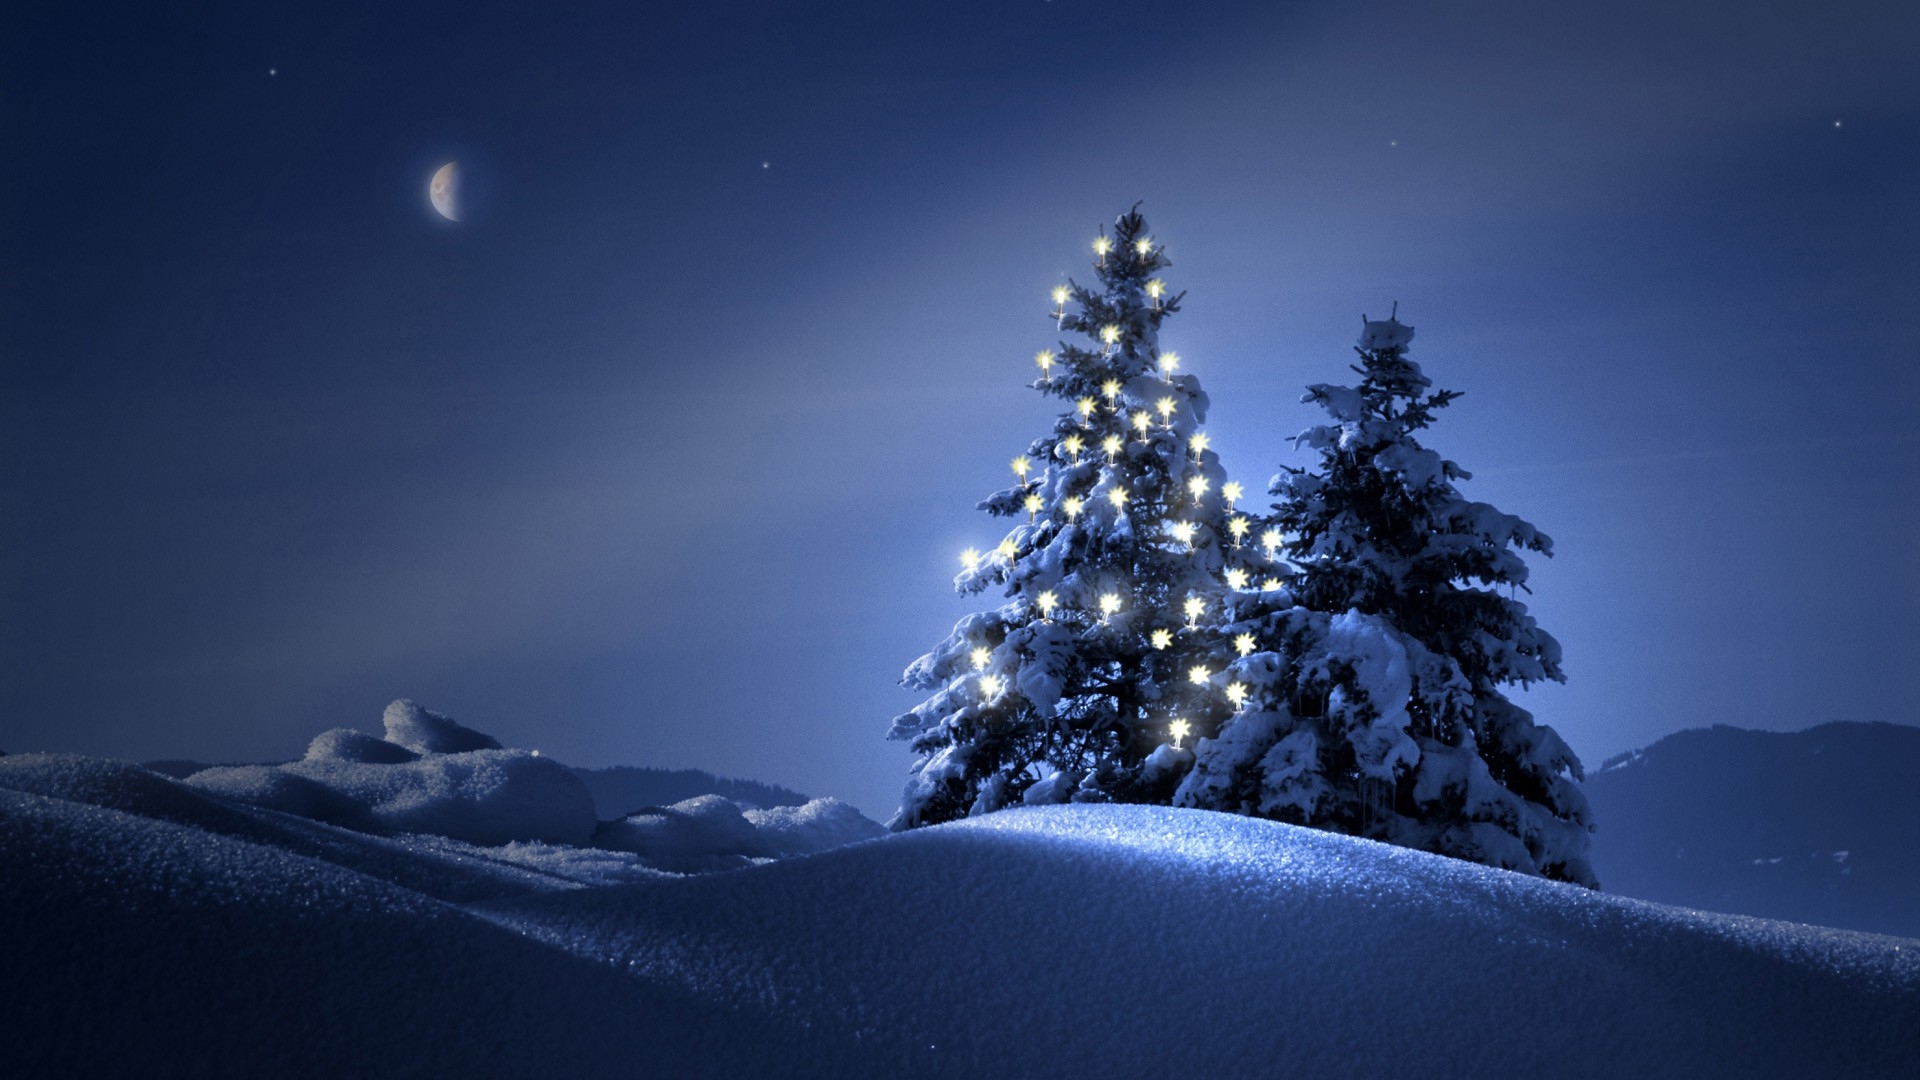 Clearly Christmas Tree At Night Wallpaper